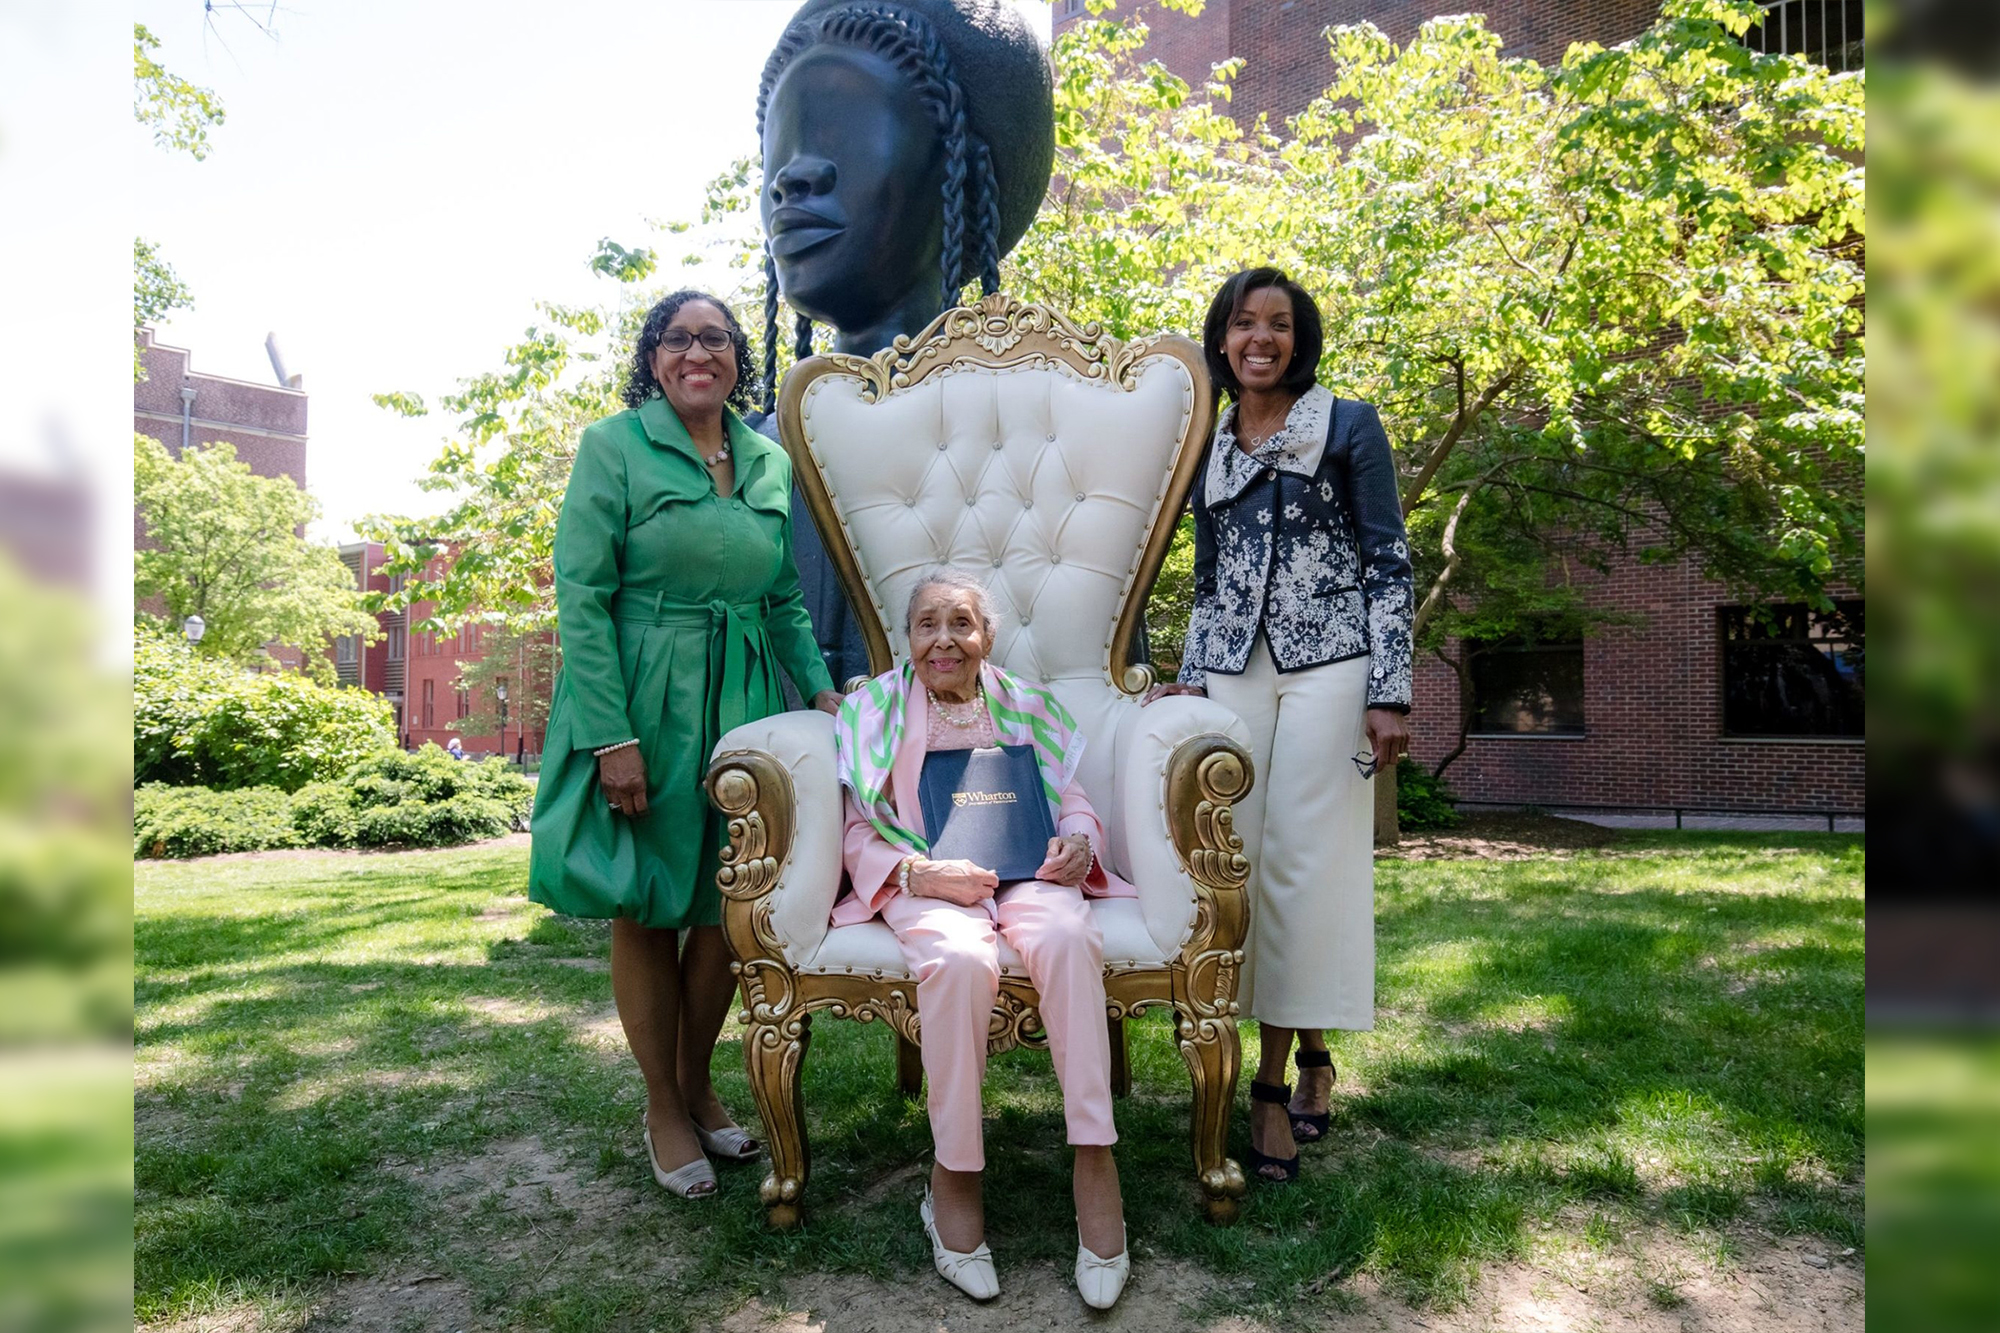 Hettie Simmons Love sits on a large ornate chair with daughter Karen Love standing to her left and Wharton Dean Erika James at her right in front of the Brick House statue.